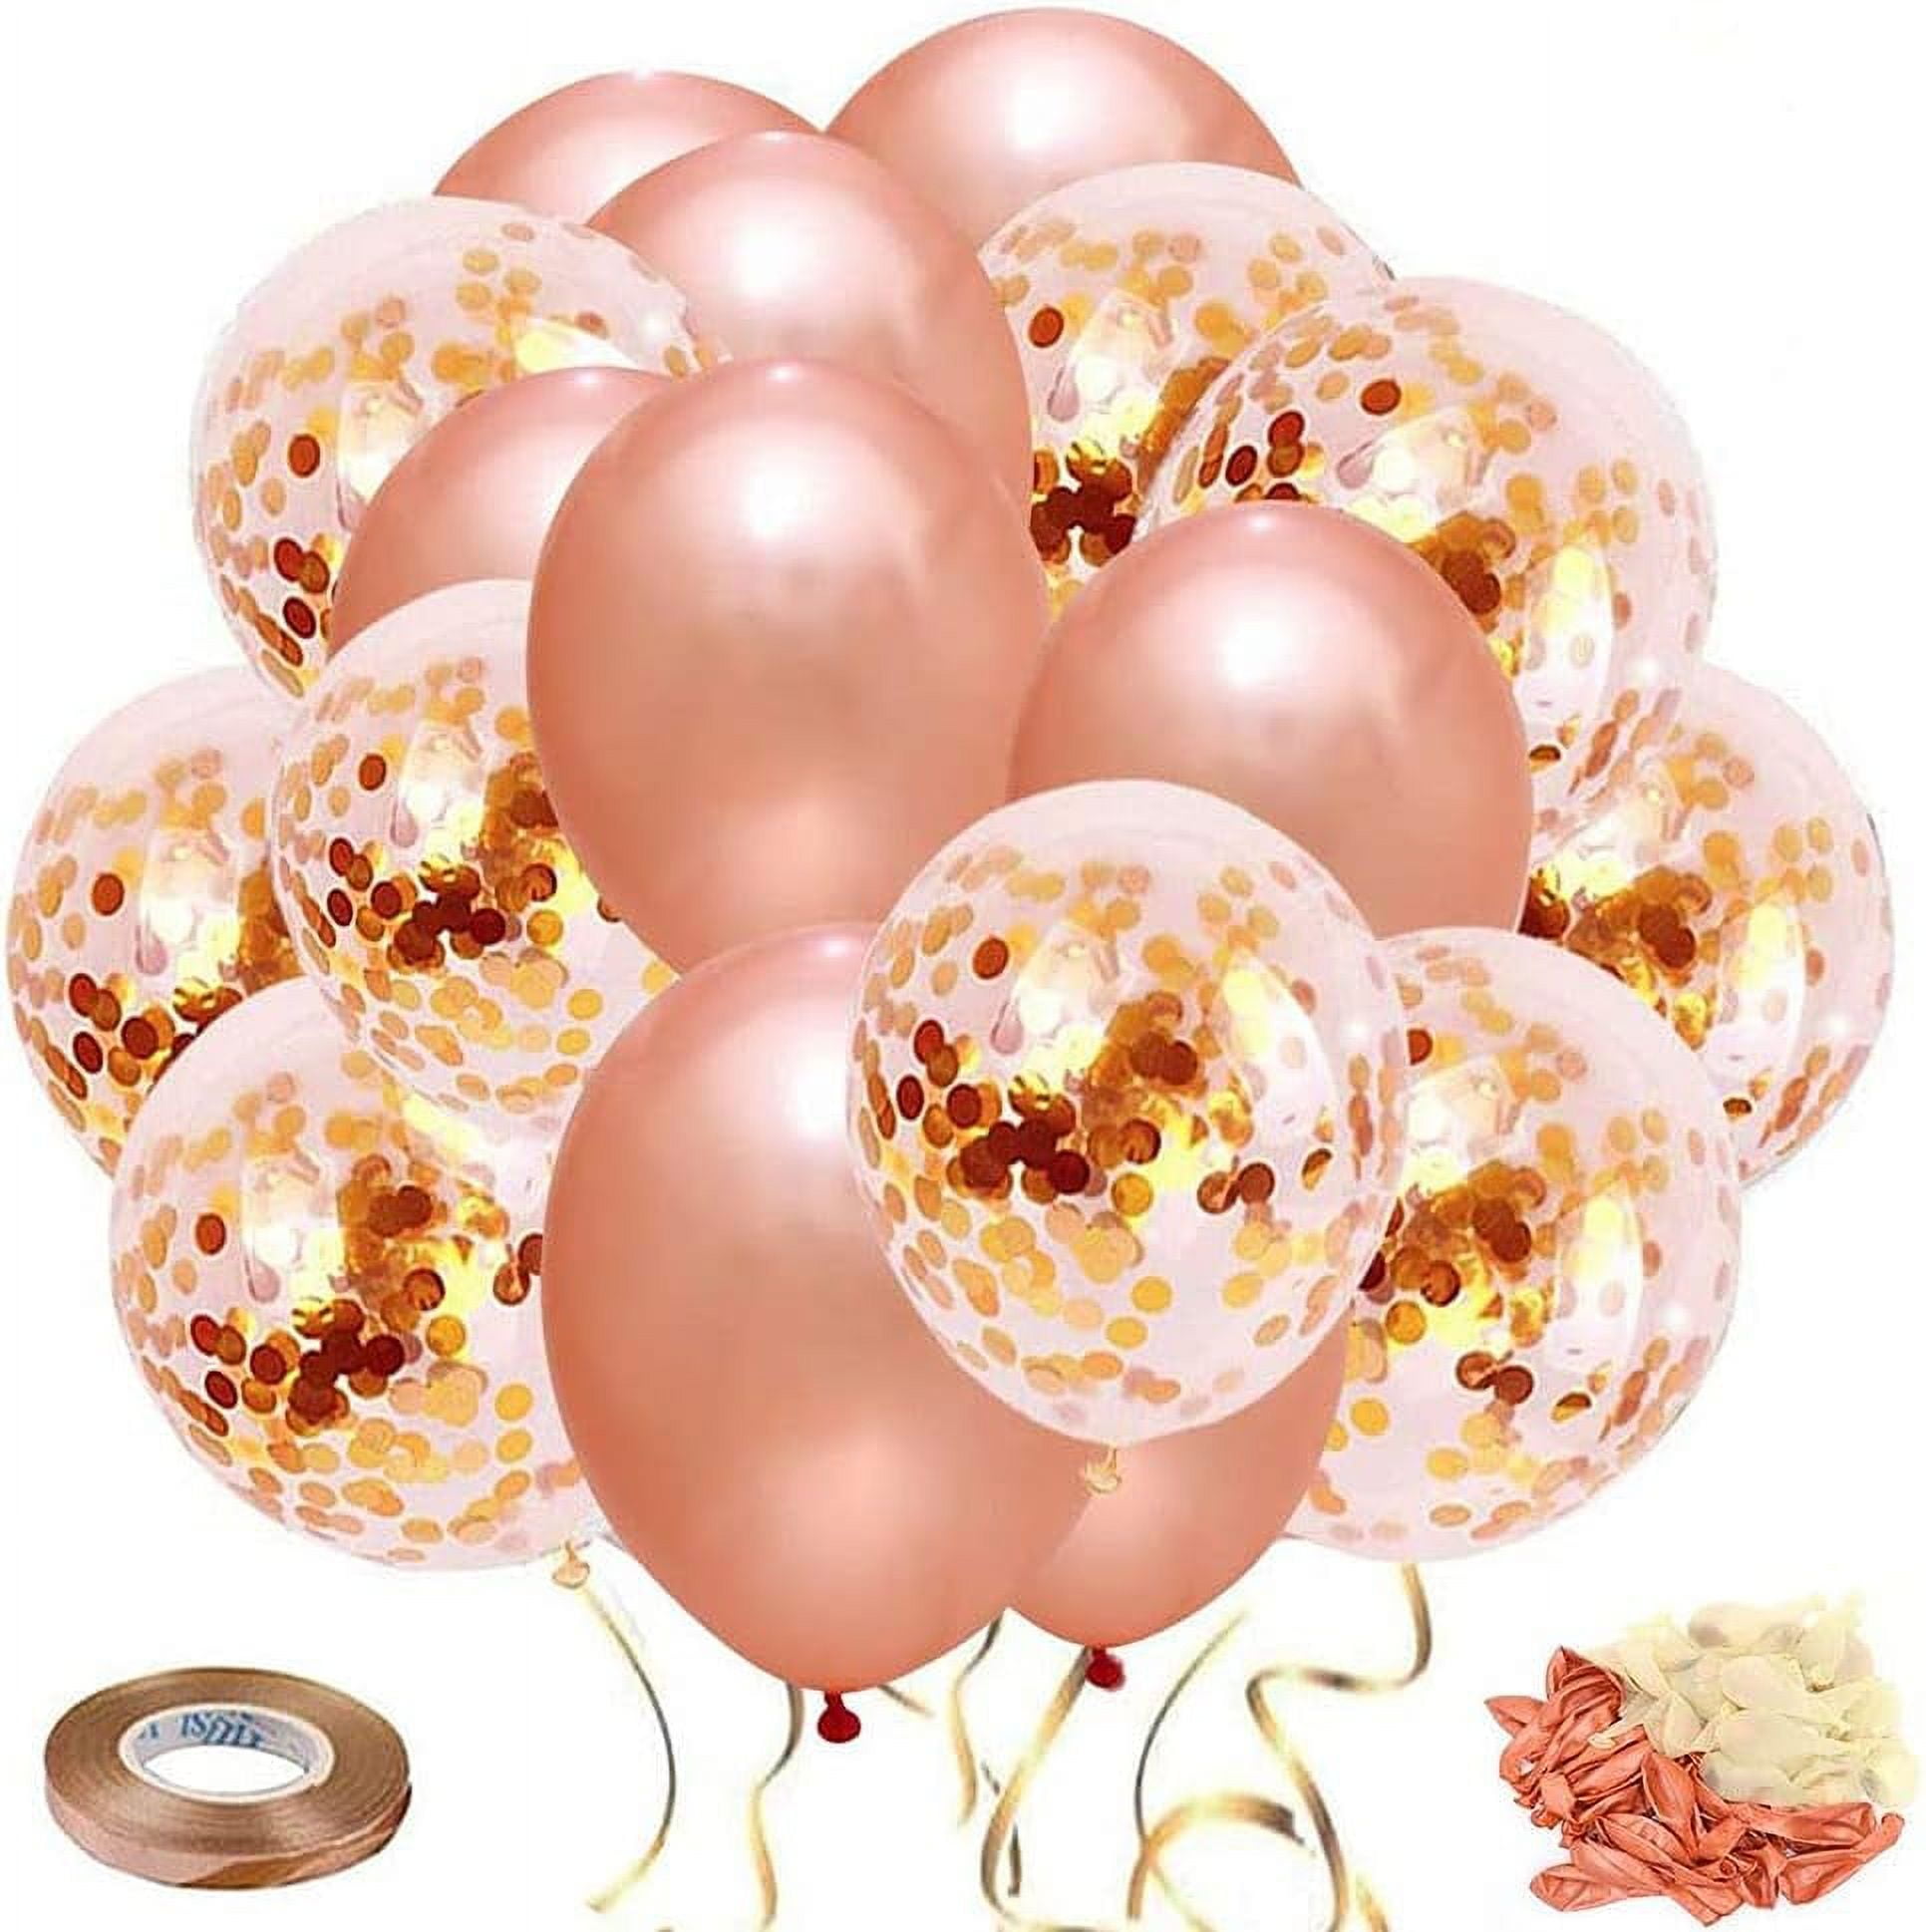 Kalyerparty Rose Gold Balloons, 60 Pack Rose Gold Confetti Balloons 12 inch  Rose Gold Balloon White Latex Balloons for Birthday Party Wedding